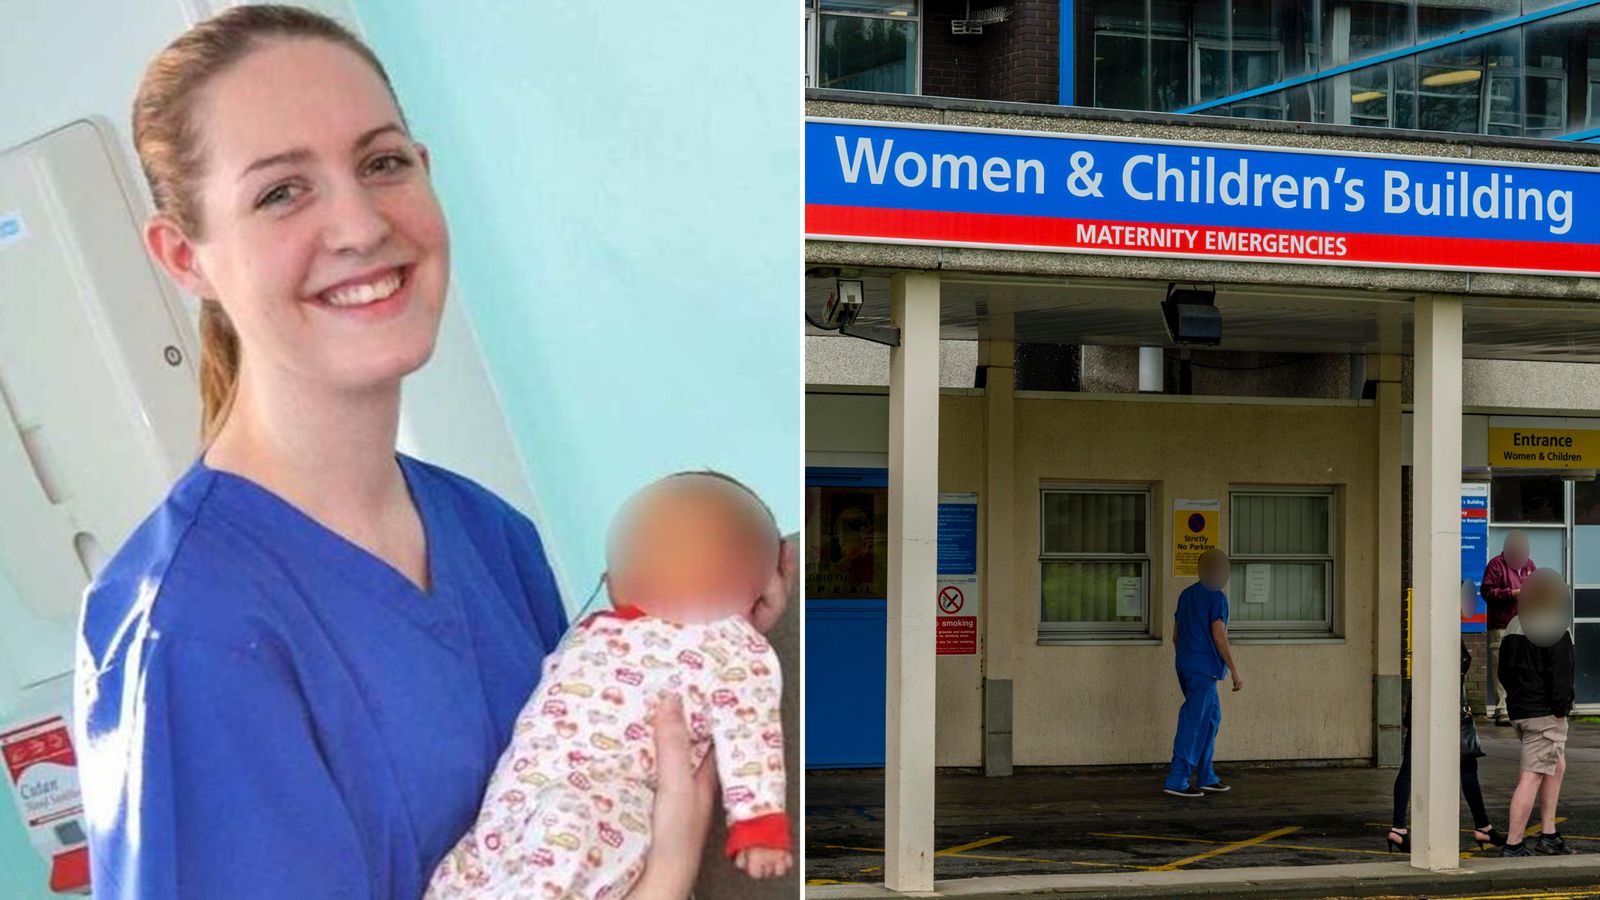 Lucy Letby trial - 'I am evil, I did this': Nurse accused of murdering babies 'wrote confession note'